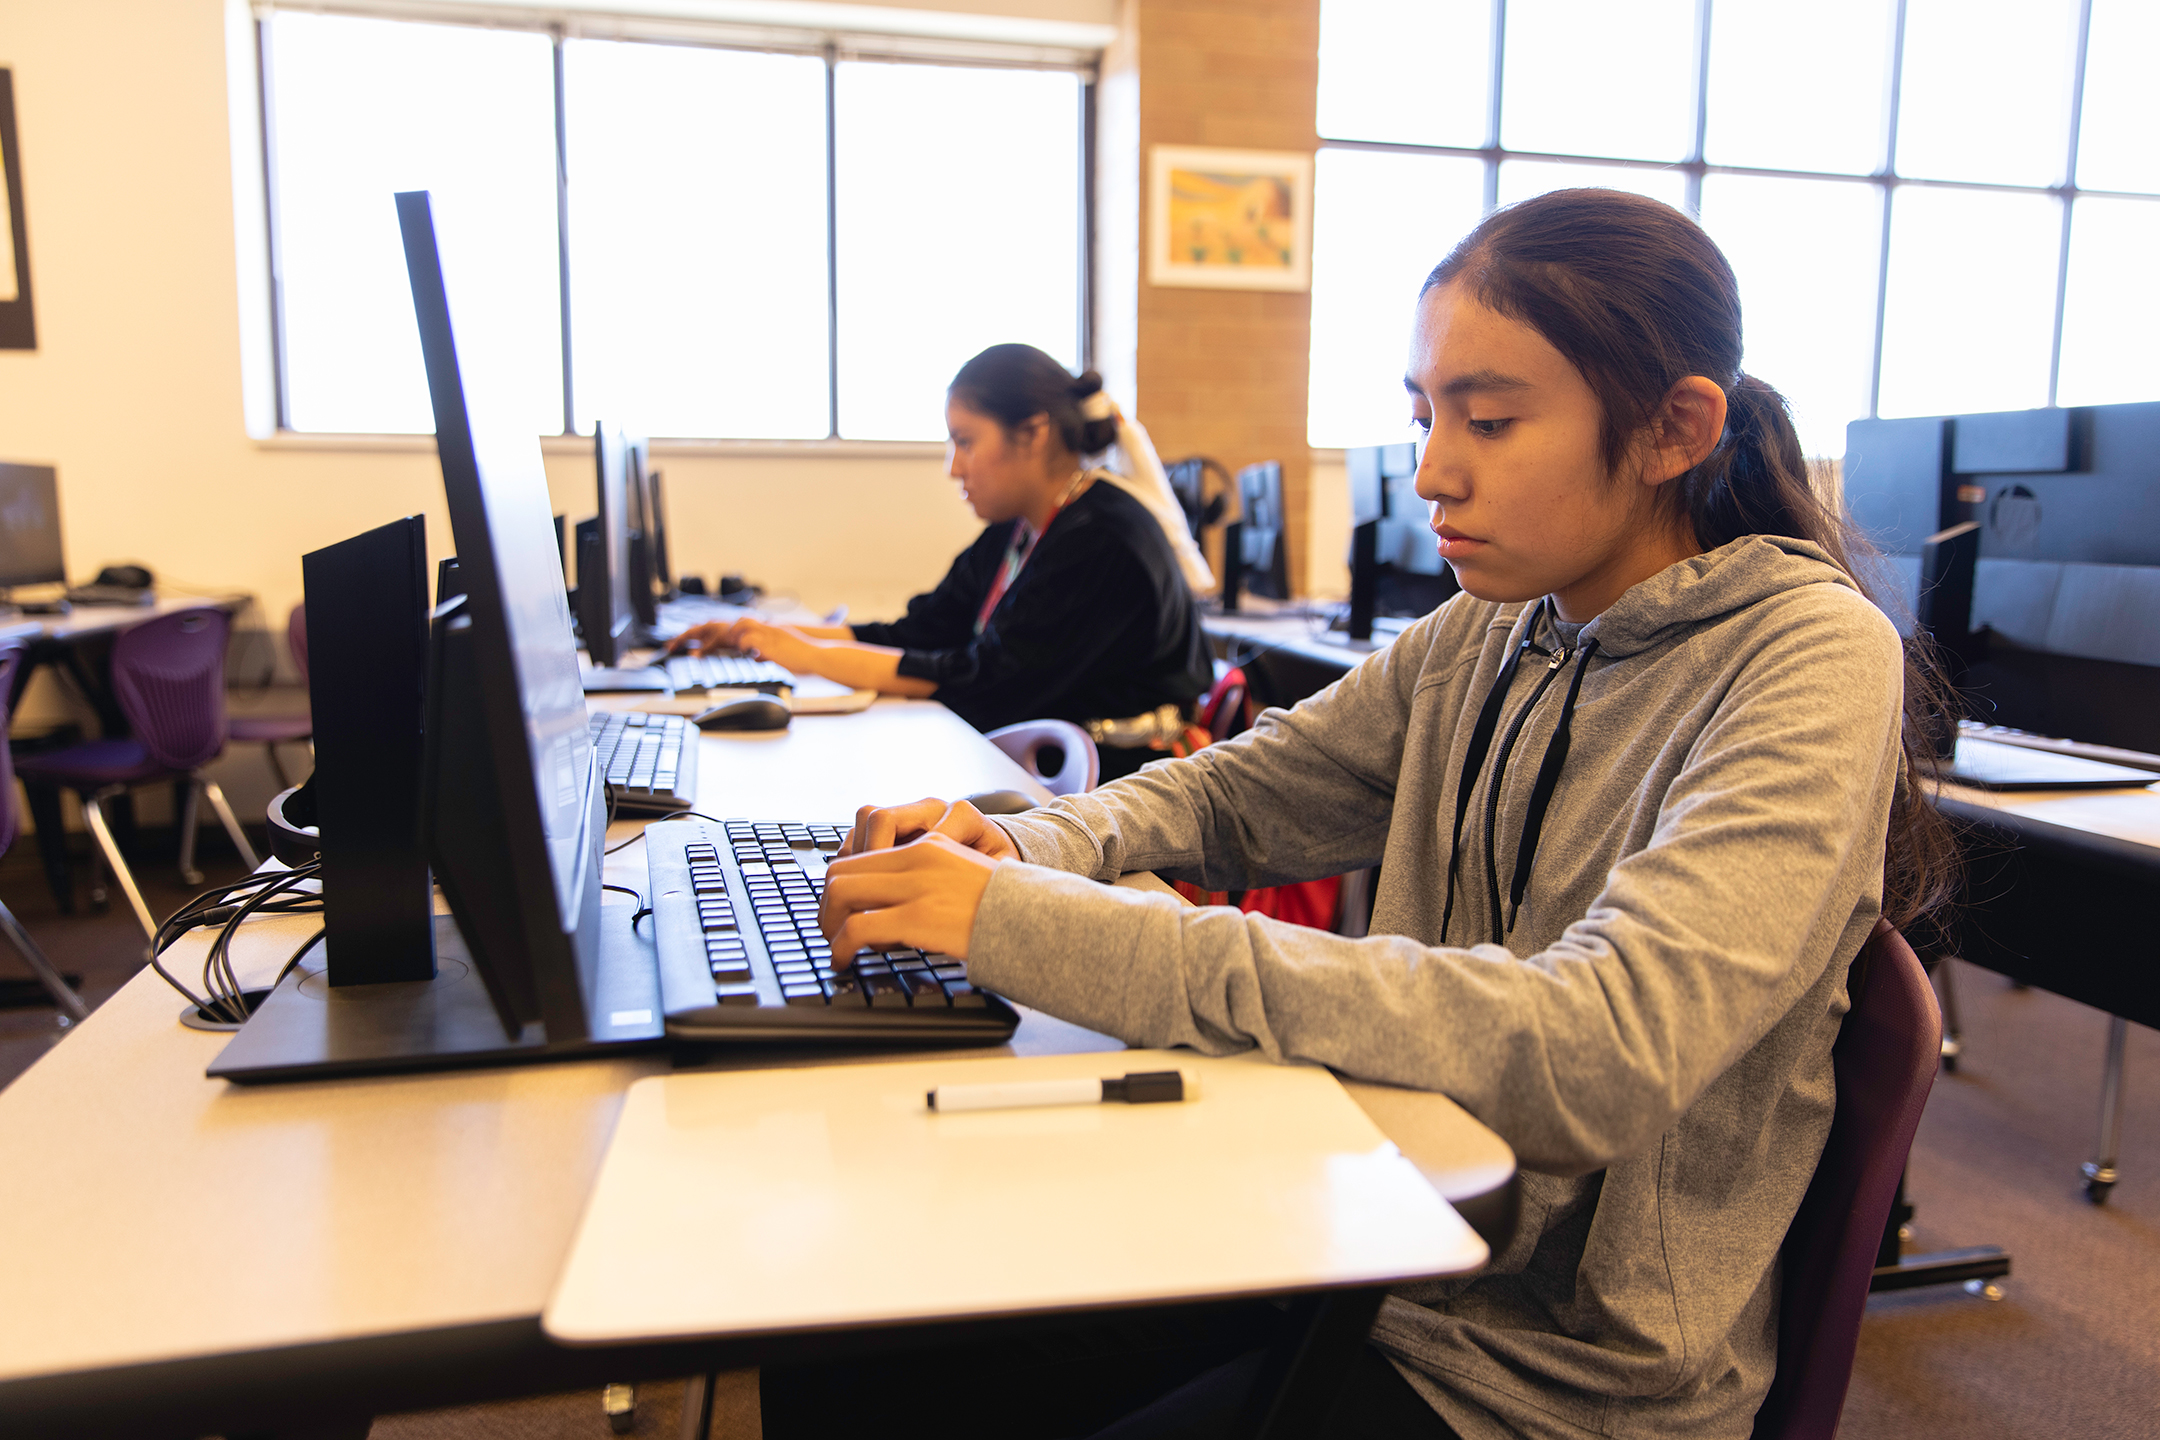 Two Navajo high school students work on computers in the library. Image taken on the Navajo Reservation, Utah, USA.